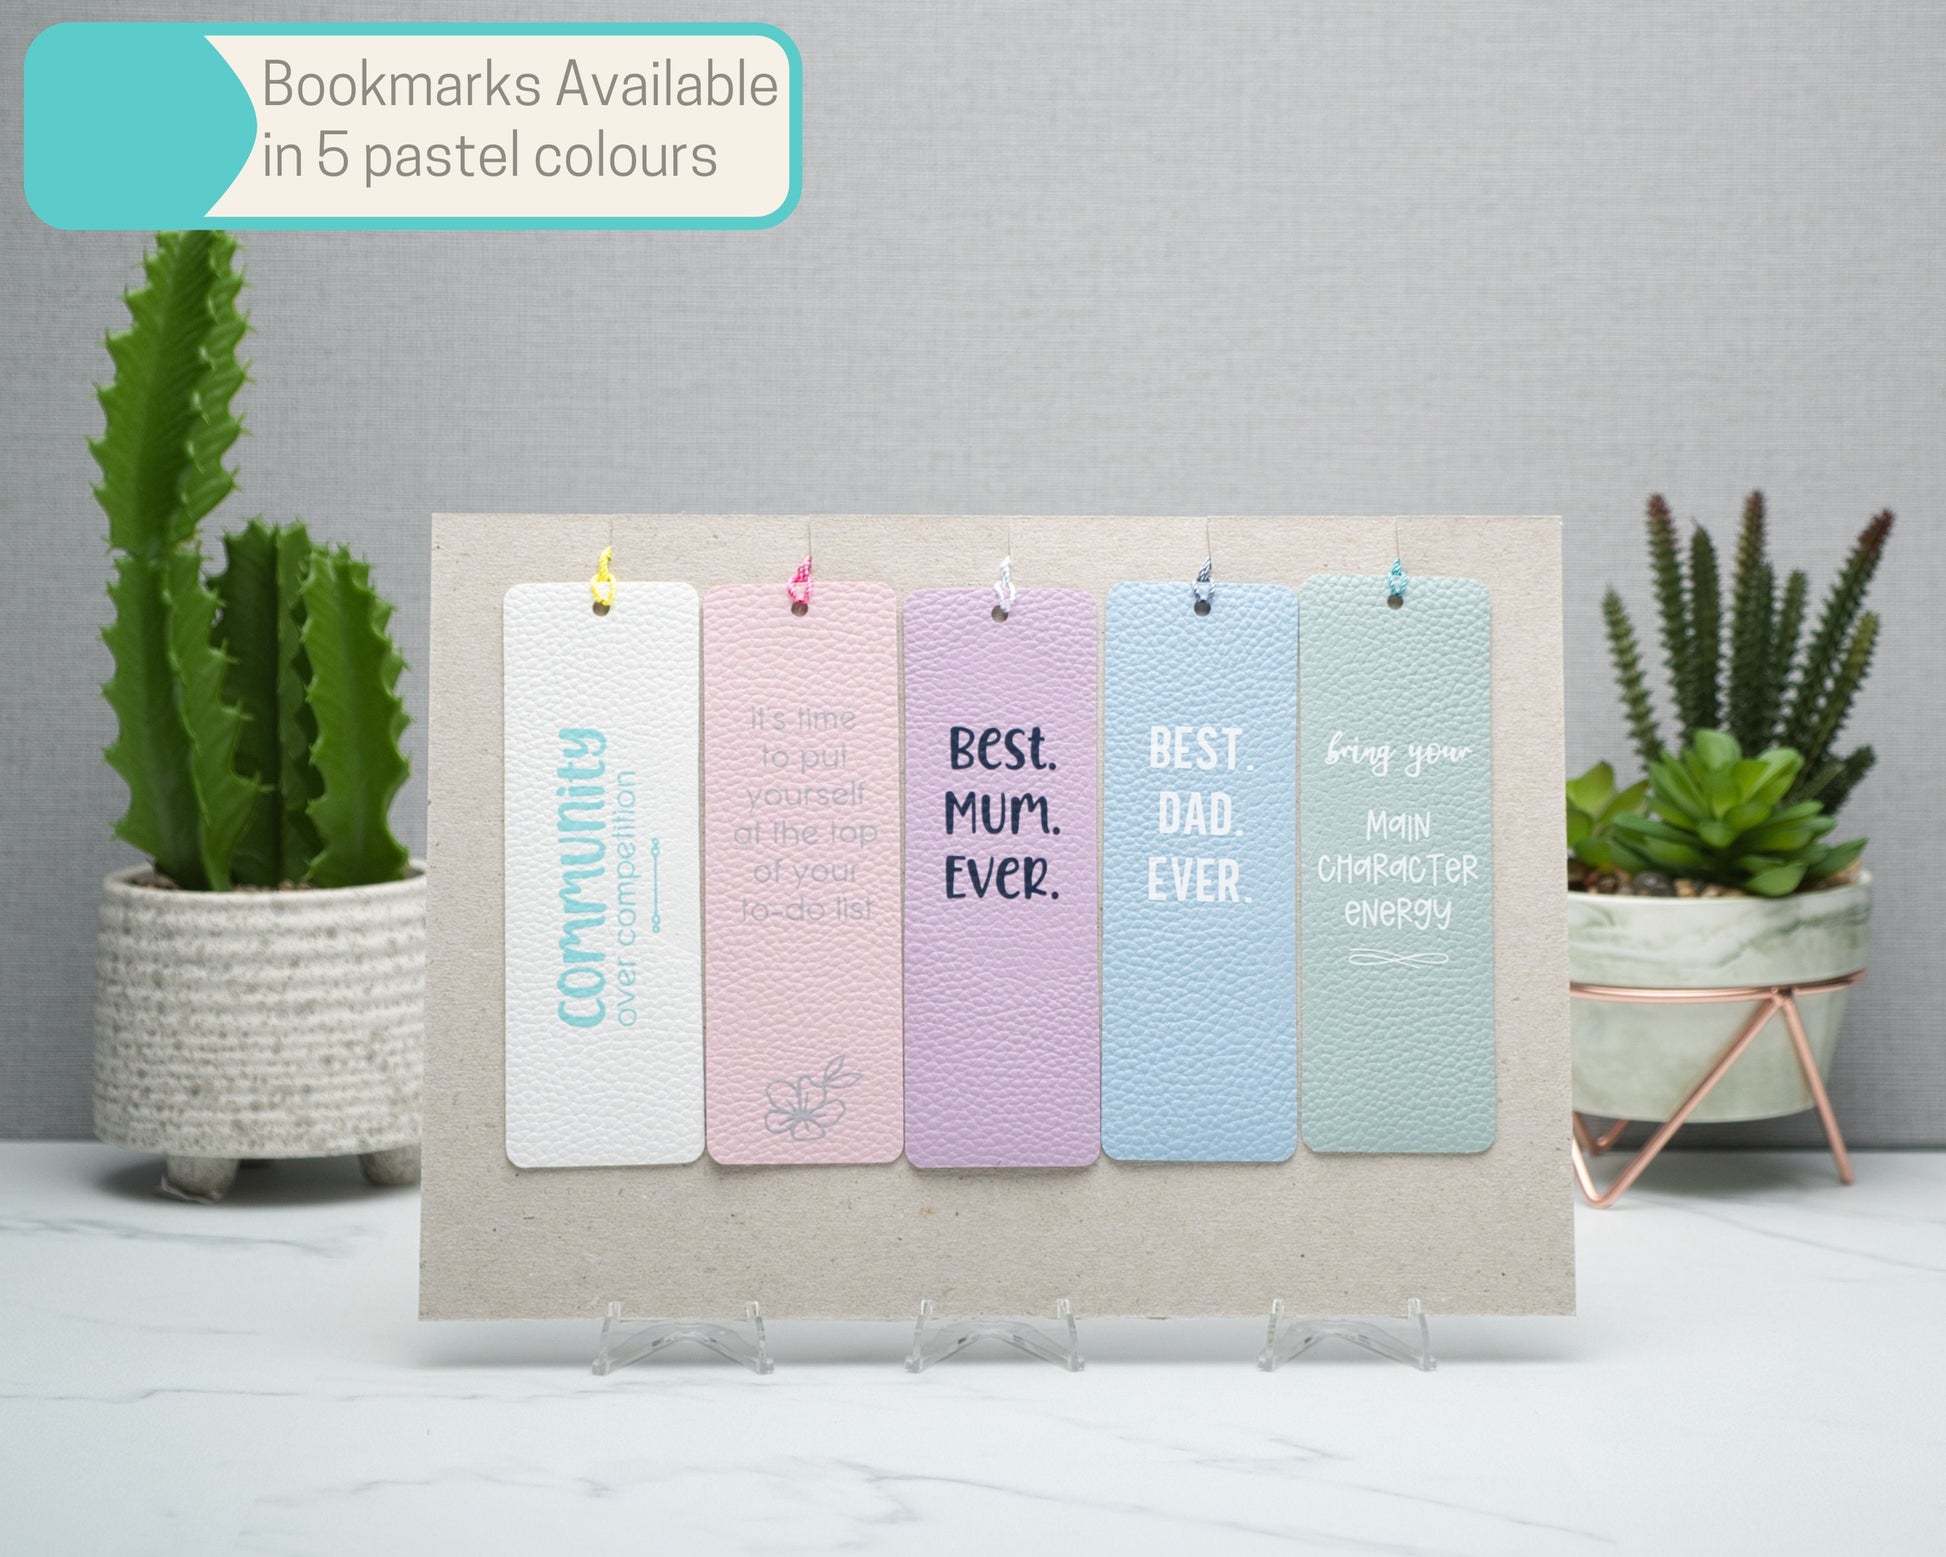 Custom Put Yourself at Top of Your To-Do List Faux Leather Bookmark, Handmade Pastel Gift for Book Lovers, Self Care Inspirational Quotes